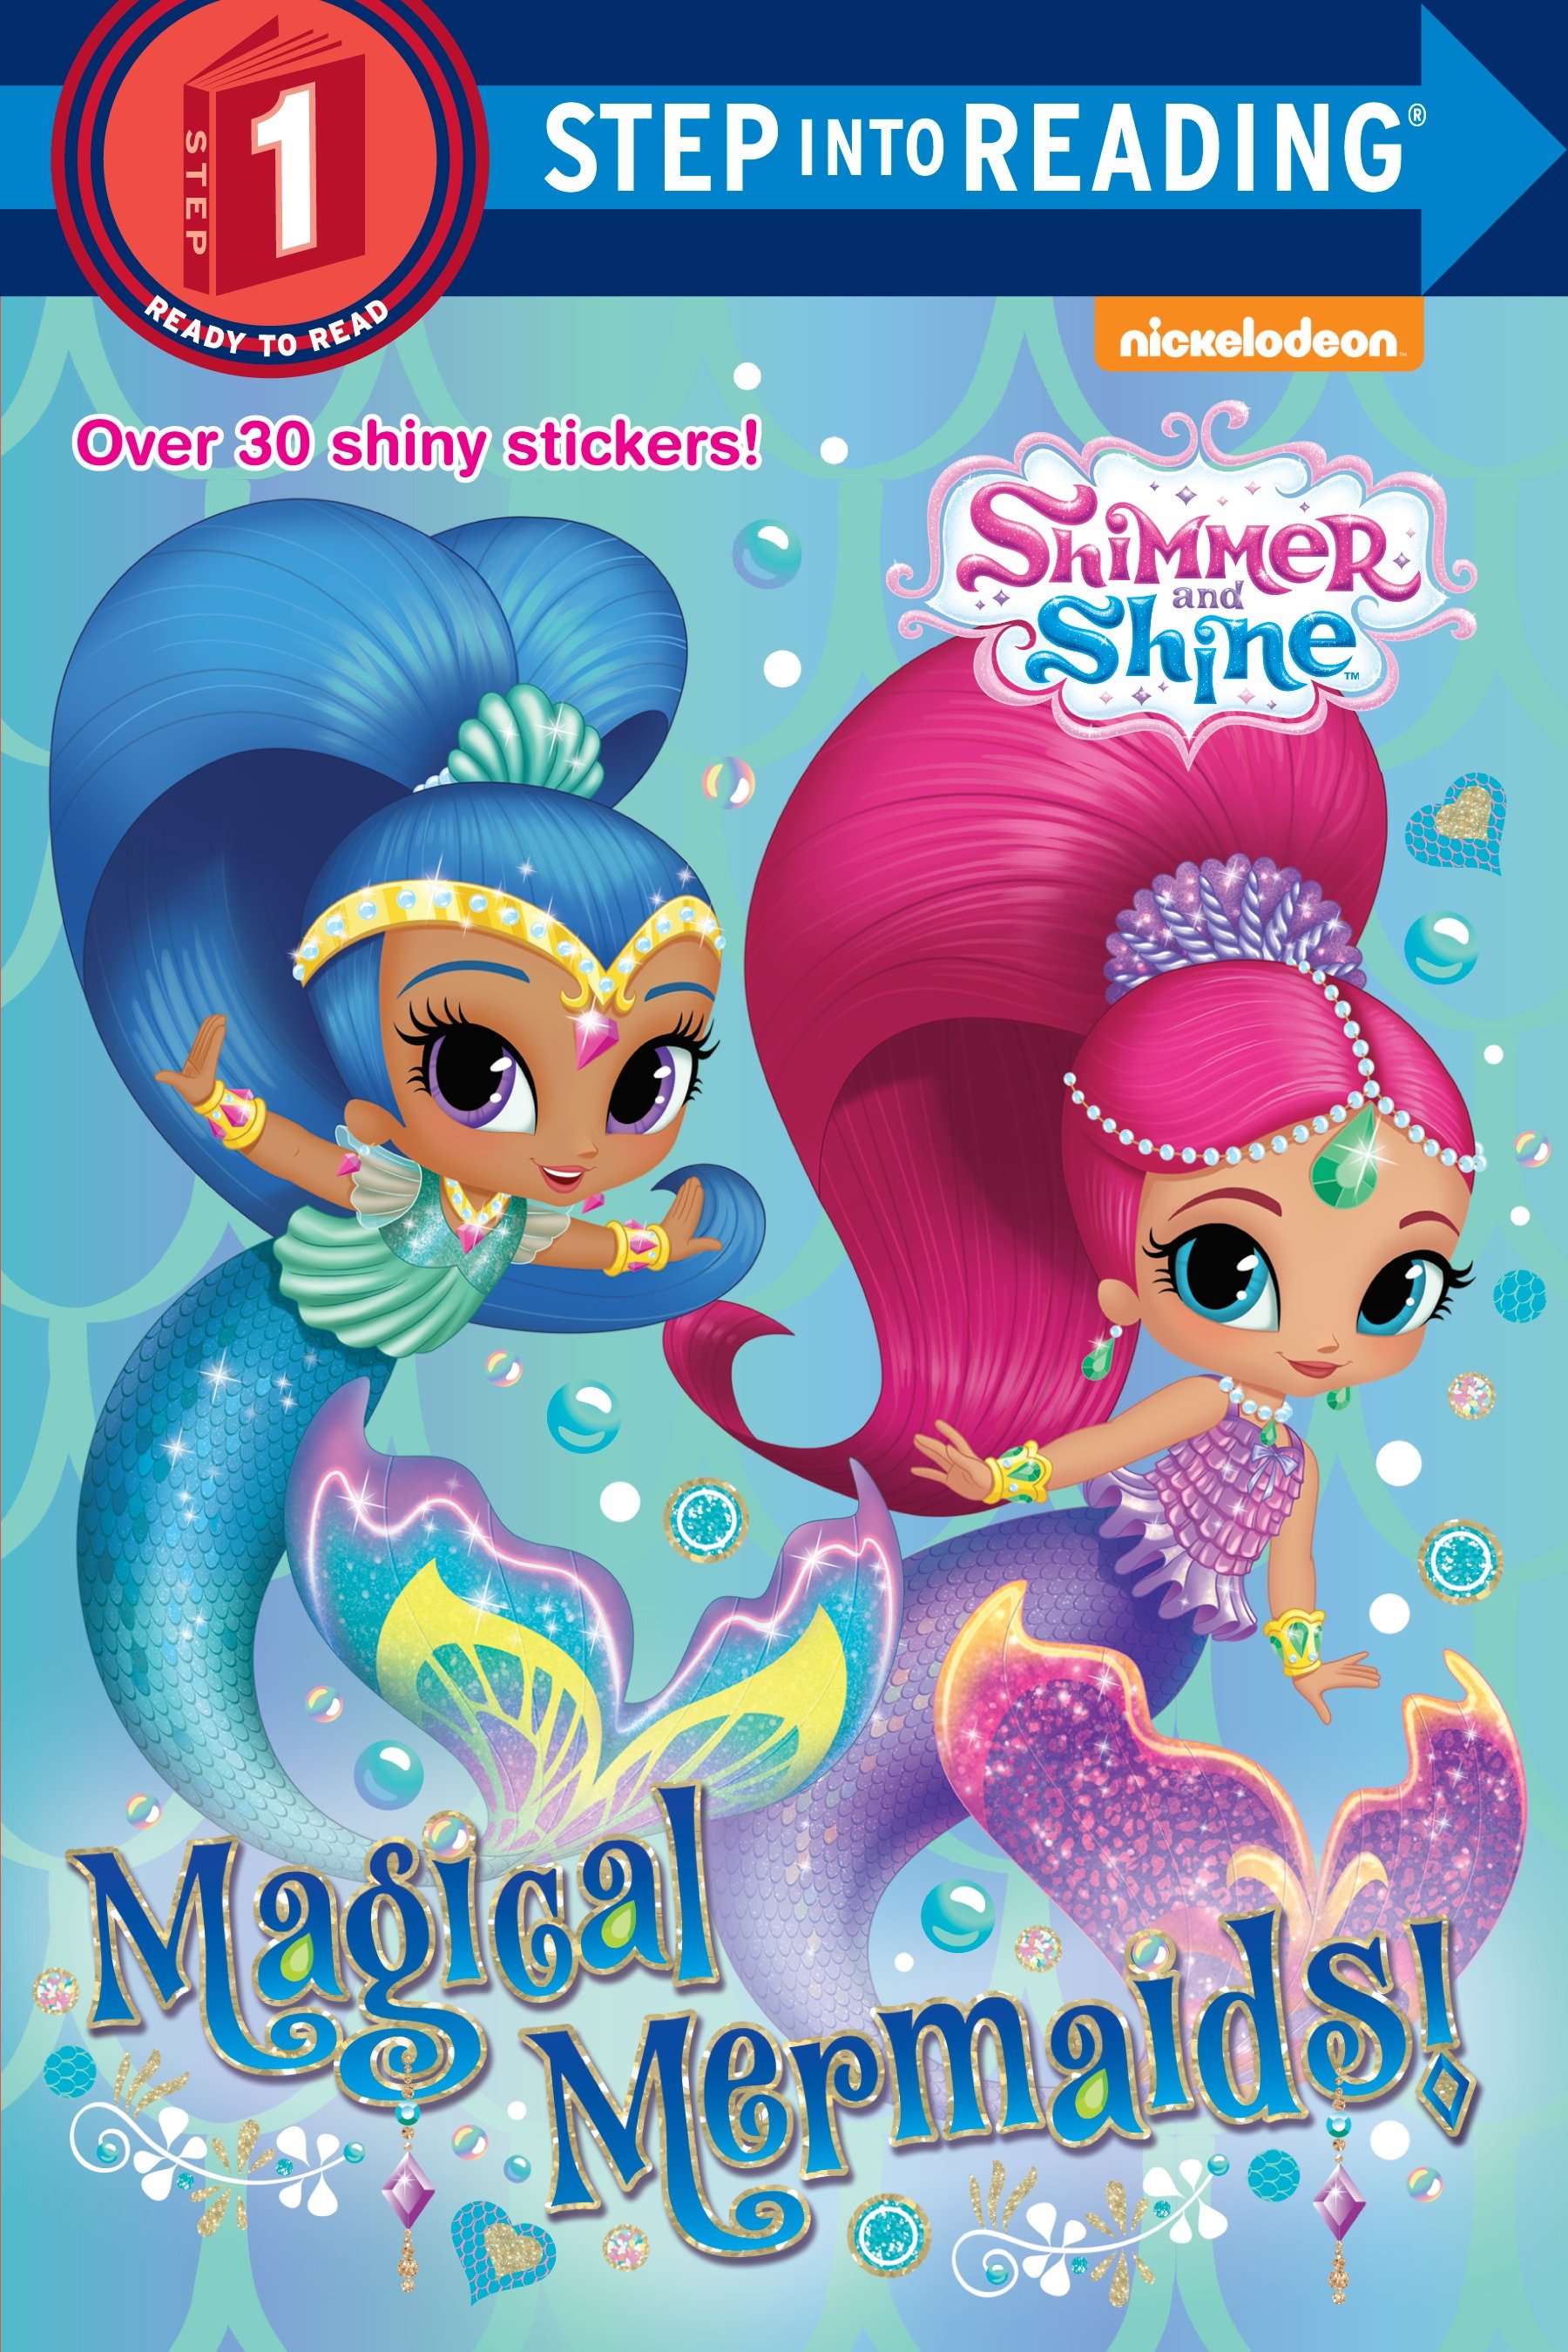 Shimmer and shine book